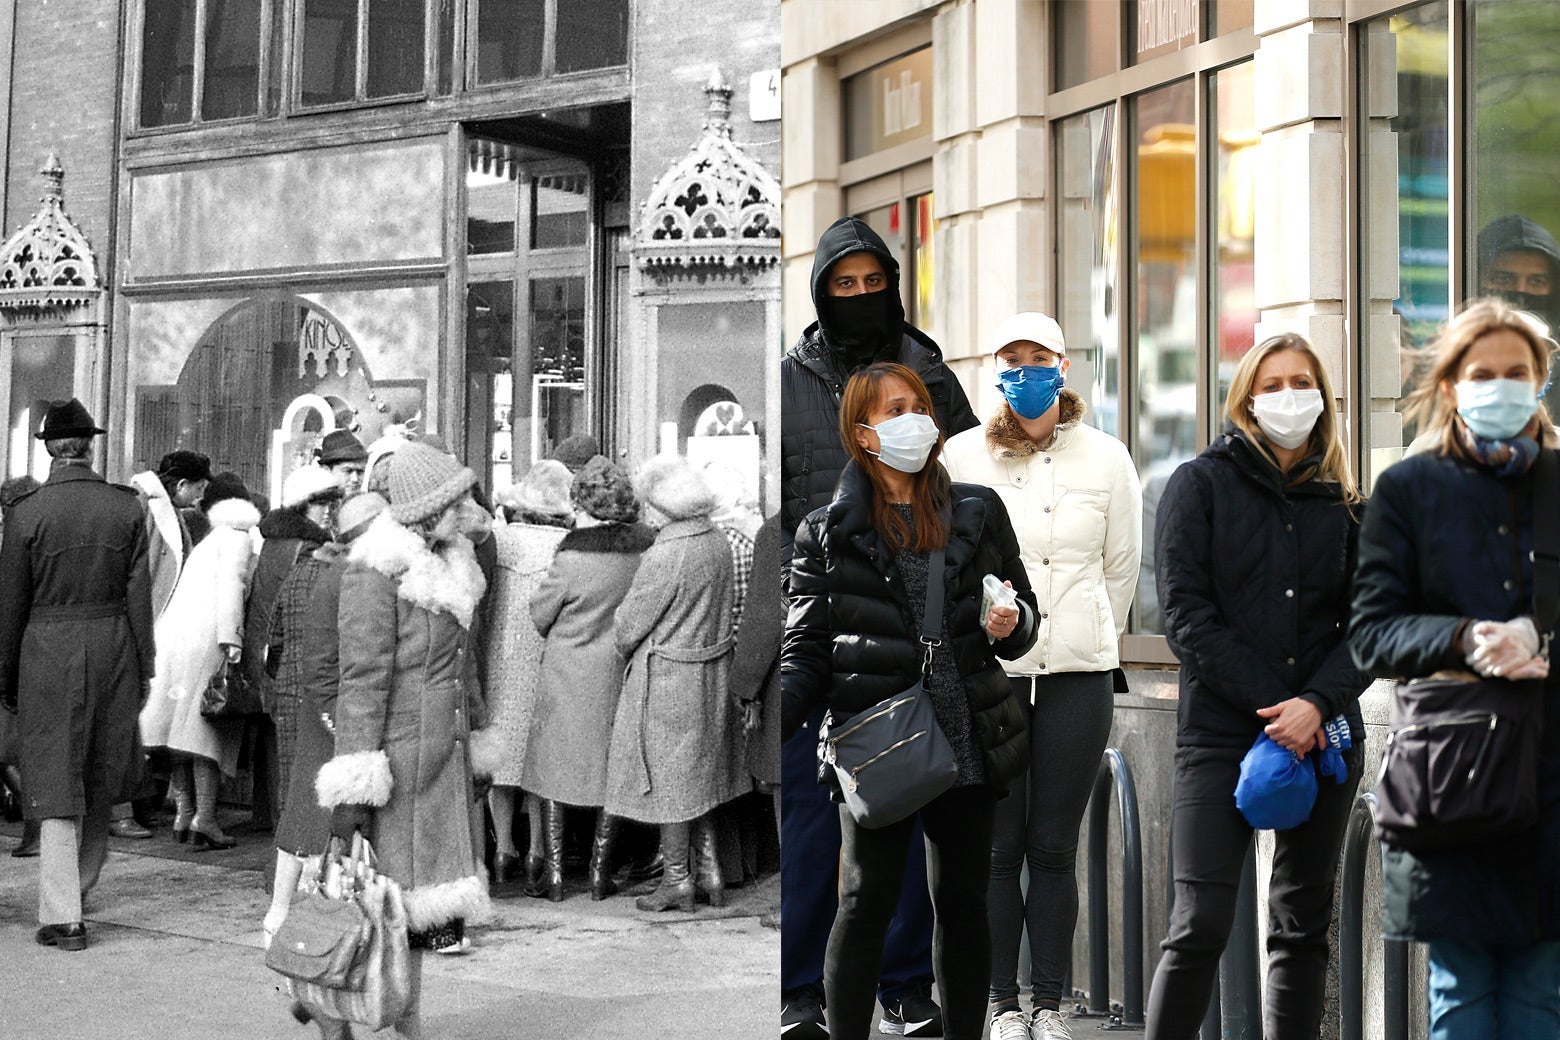 Side-by-side photos of people crowded around the entrance of a market in Hungary in 1979 and people in New York City waiting in line to enter a Trader Joe's.